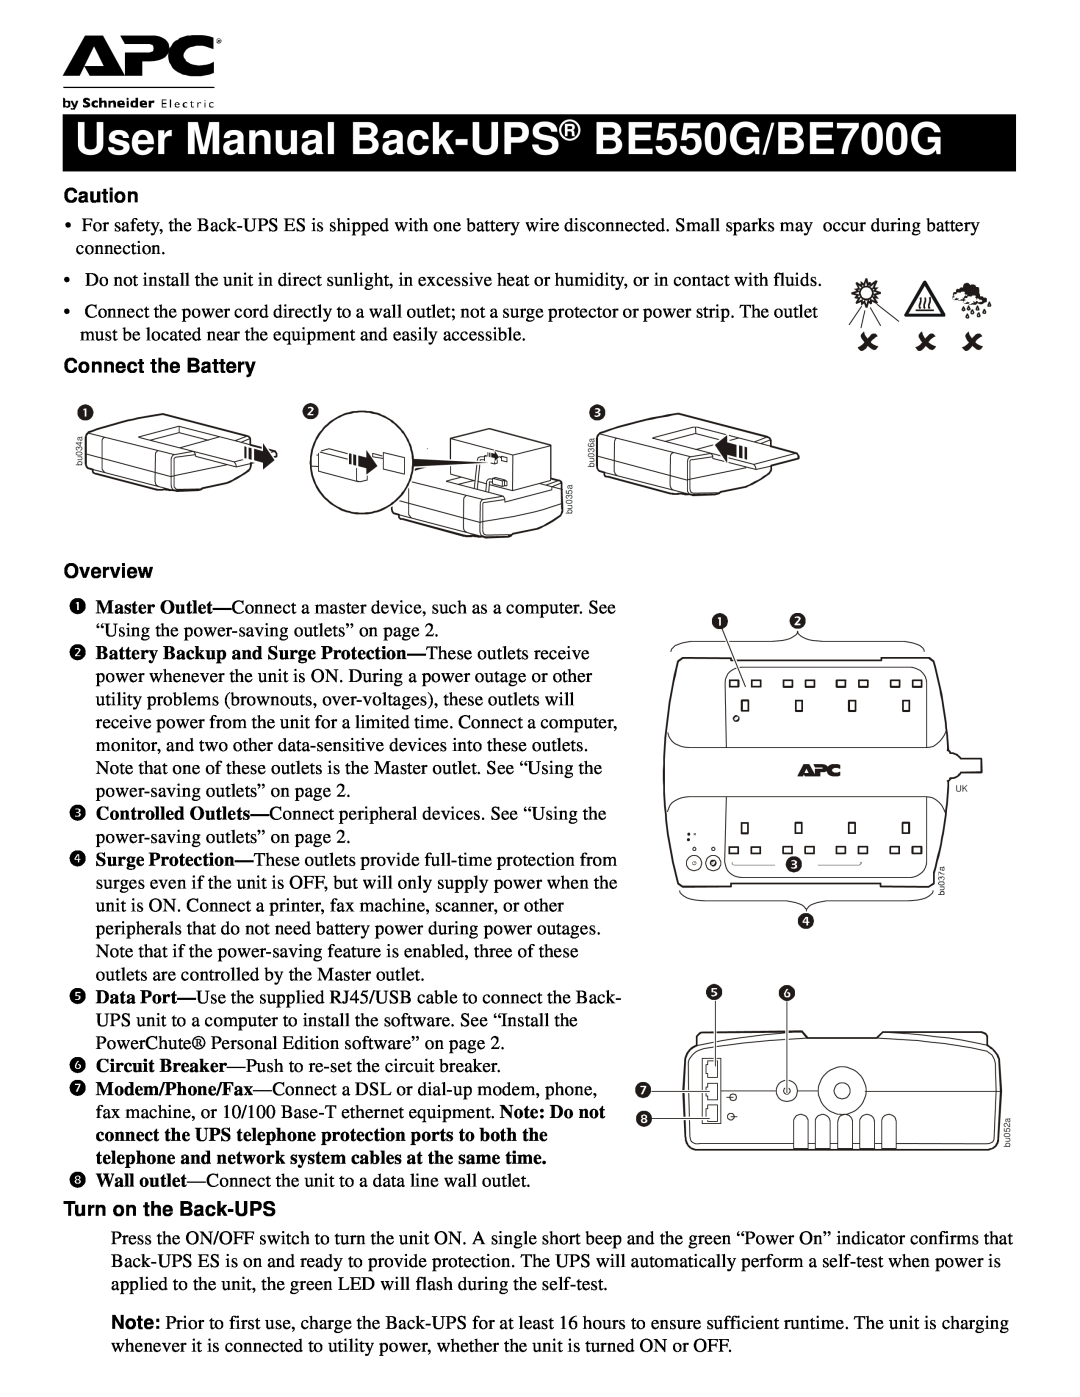 APC user manual Connect the Battery, Overview, Turn on the Back-UPS, User Manual Back-UPS BE550G/BE700G 